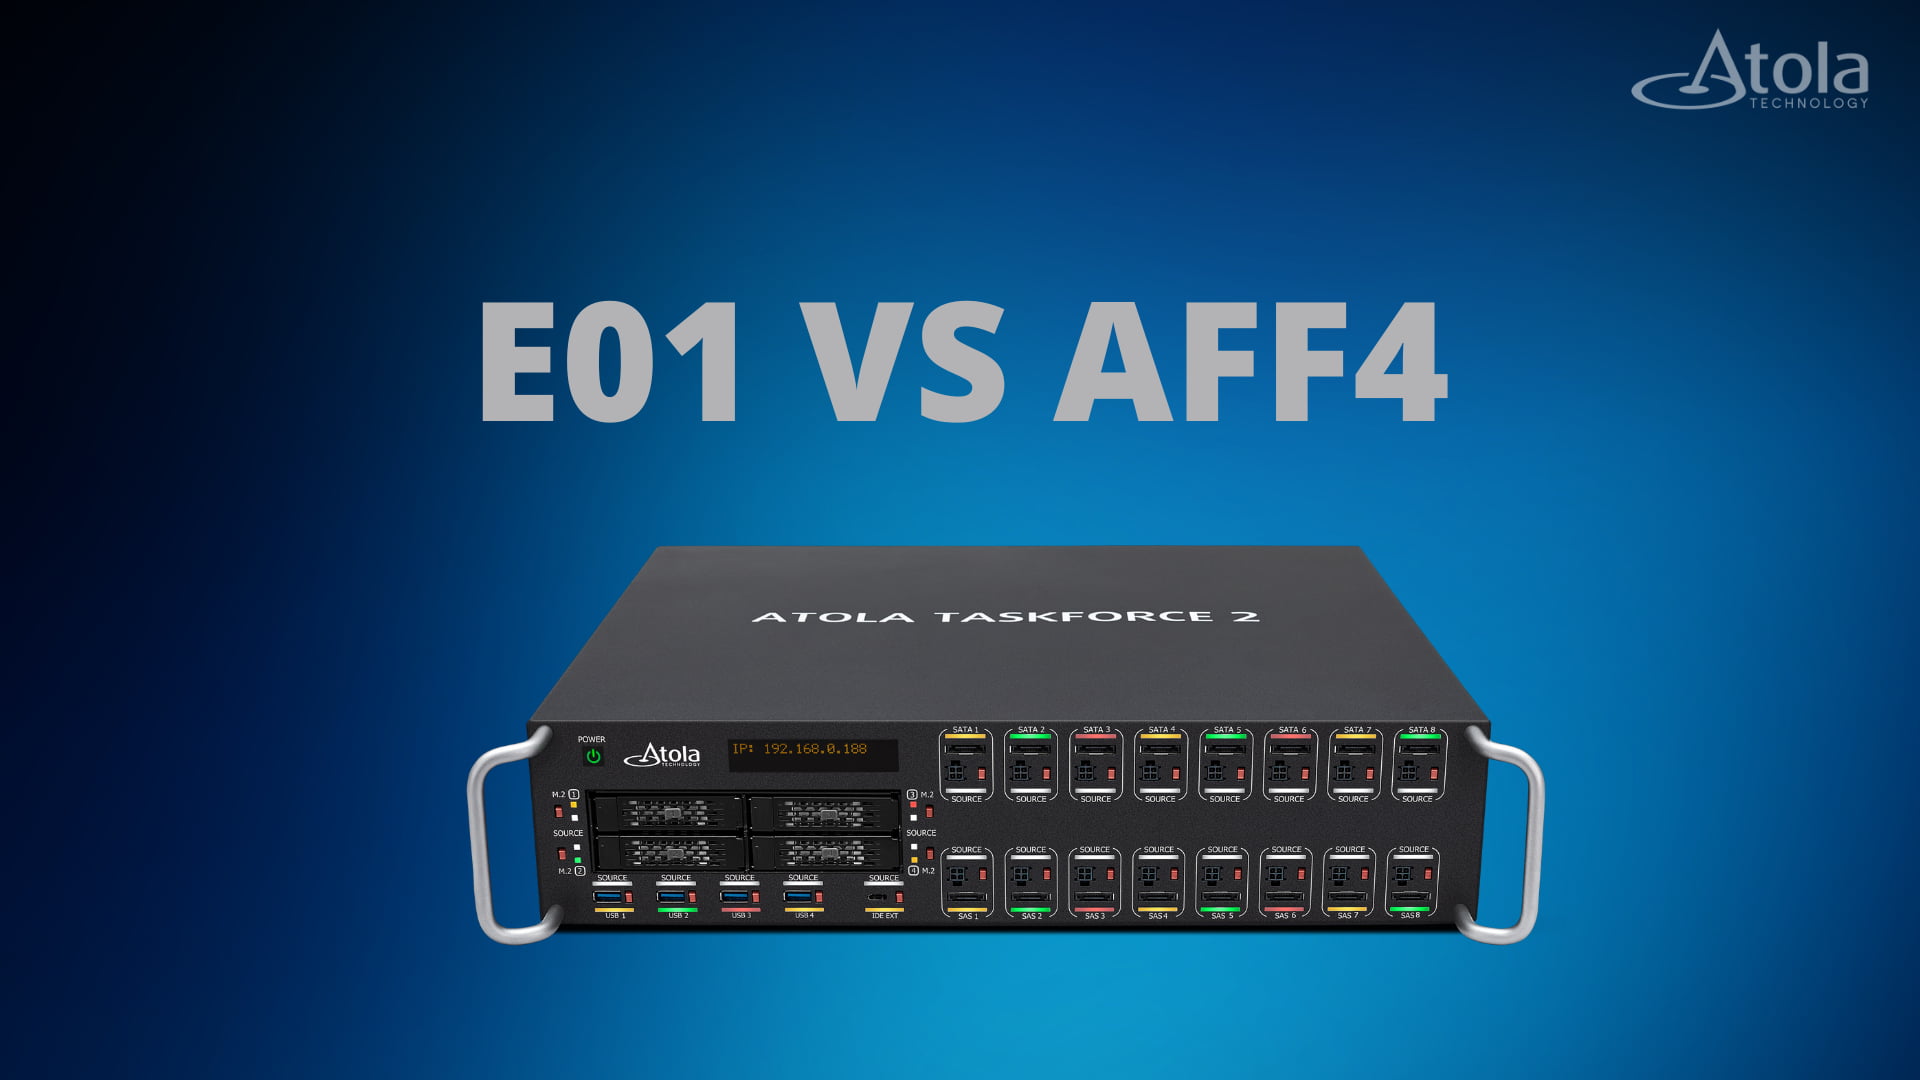 Which forensic file format to use for the maximum acquisition speed? AFF4 or E01?